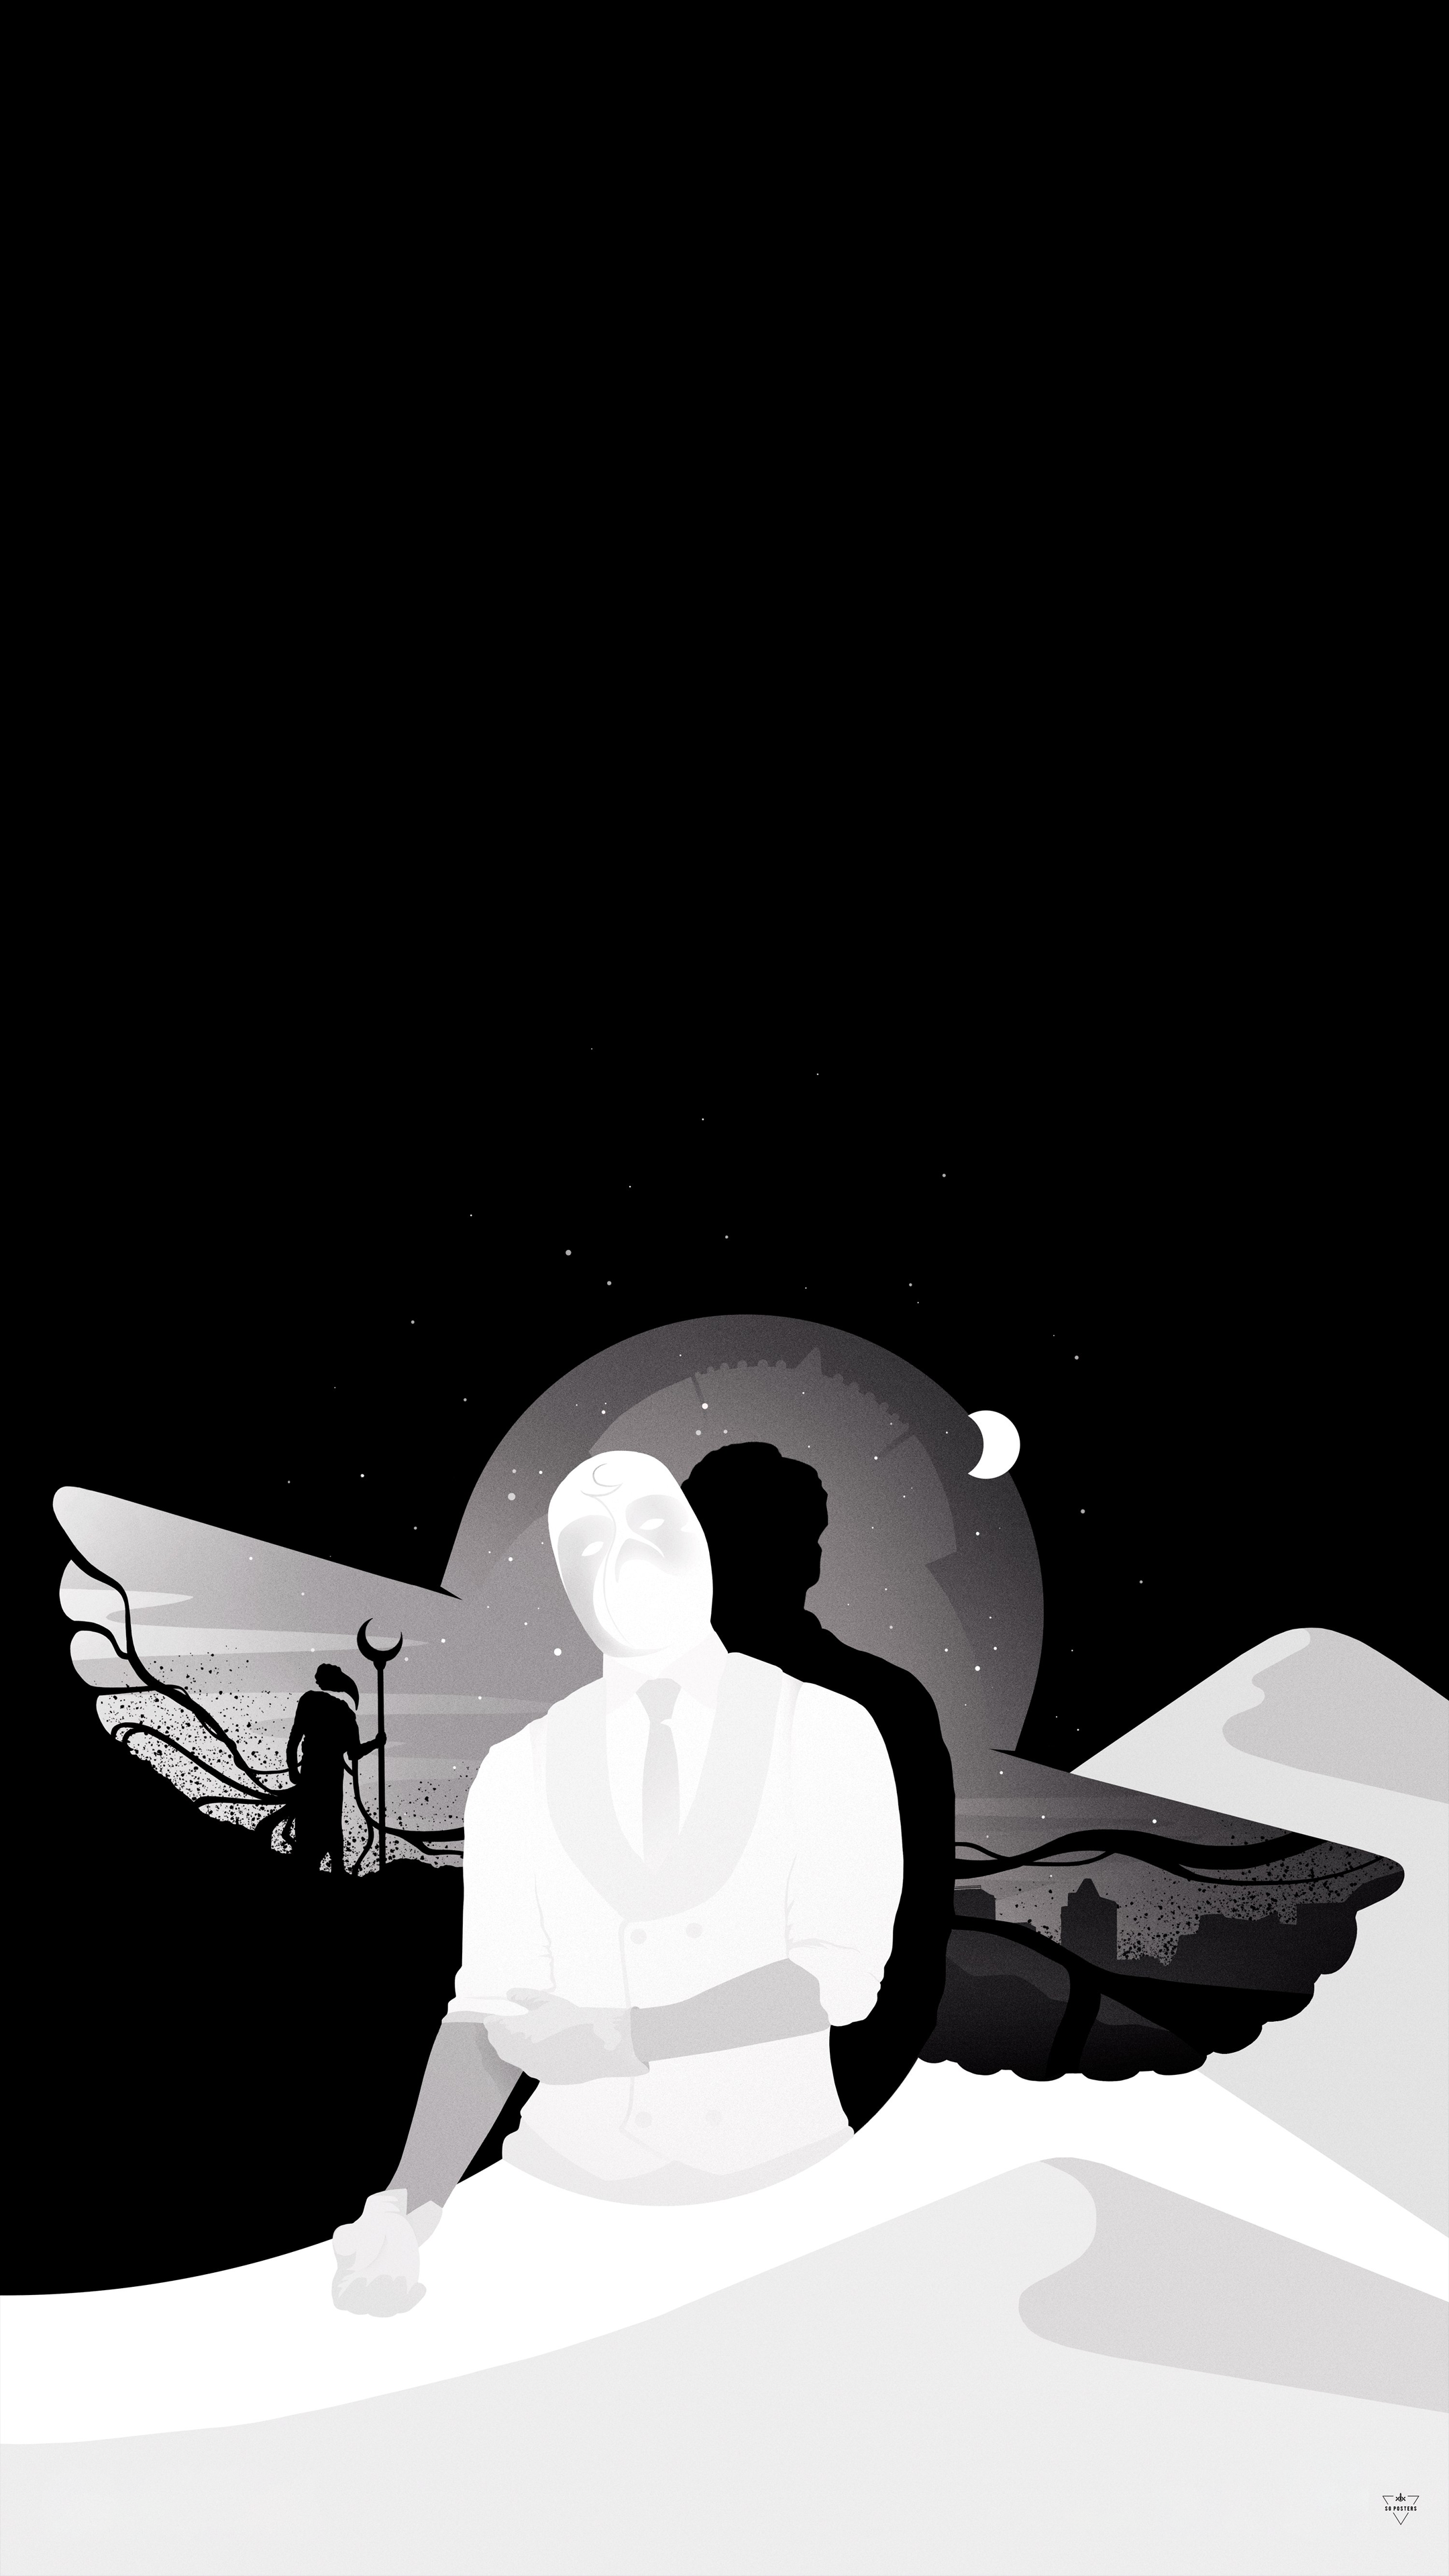 Converted official Moon Knight posters to mobile wallpaper